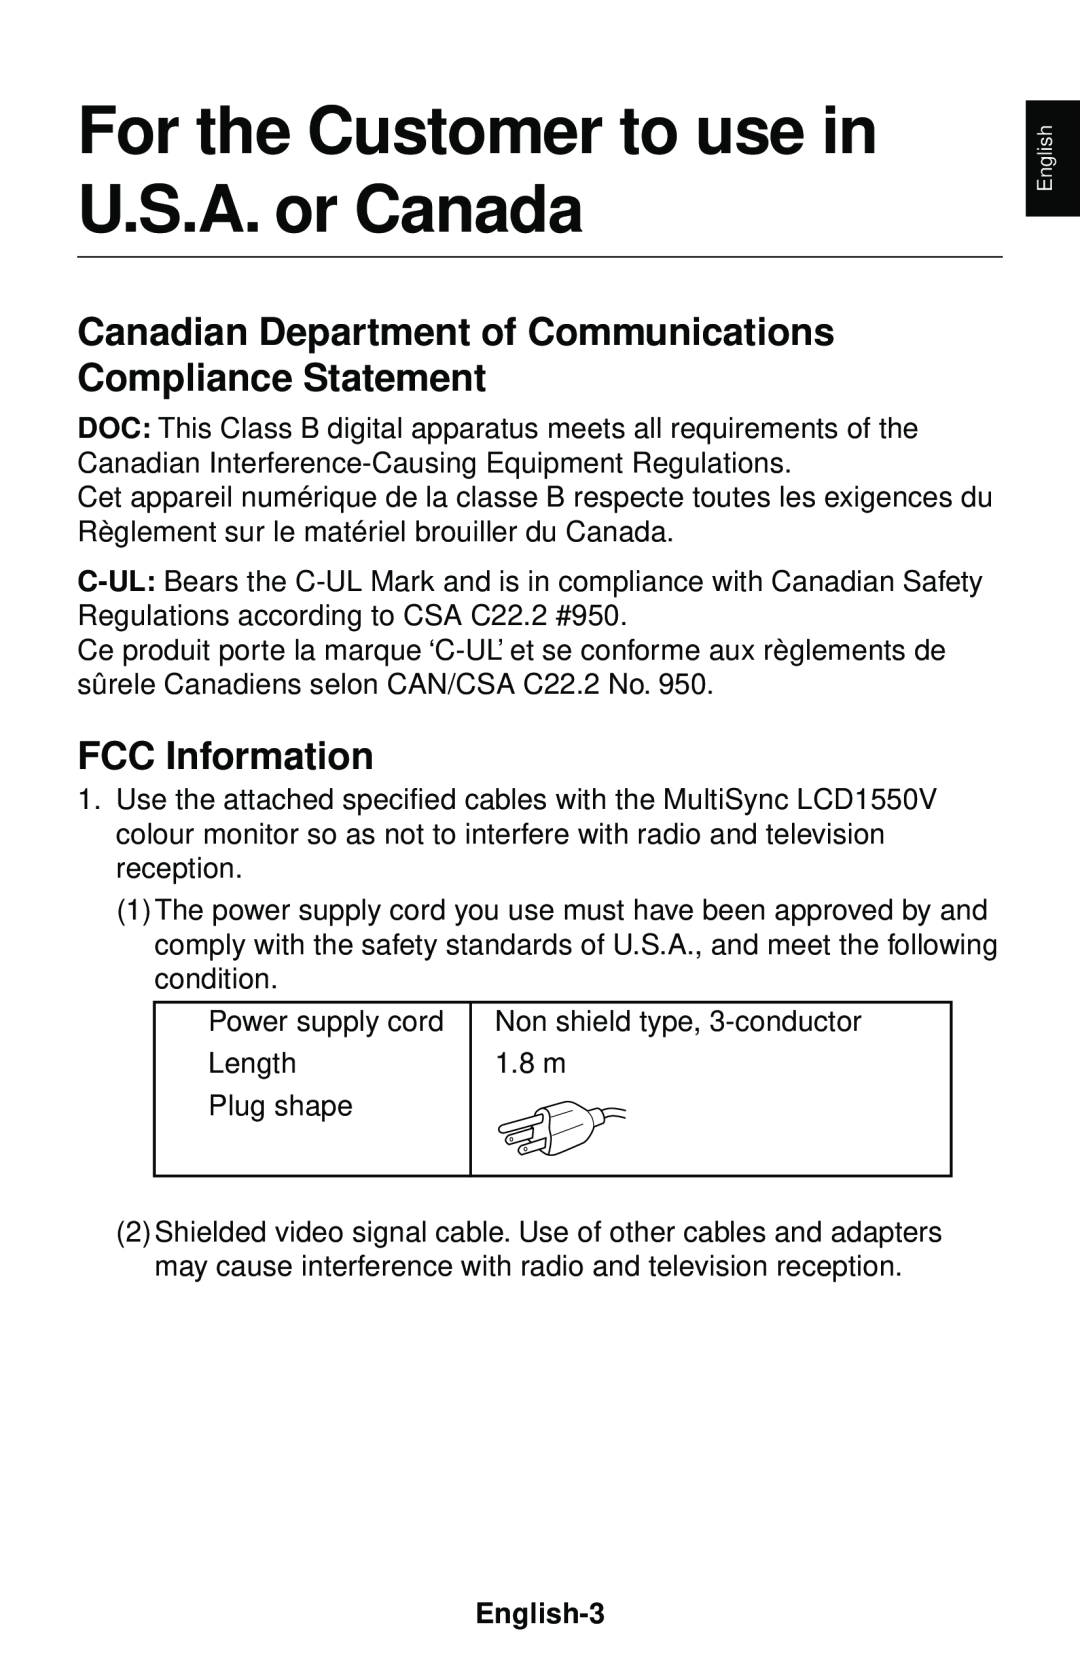 NEC LCD1550V For the Customer to use in U.S.A. or Canada, Canadian Department of Communications Compliance Statement 